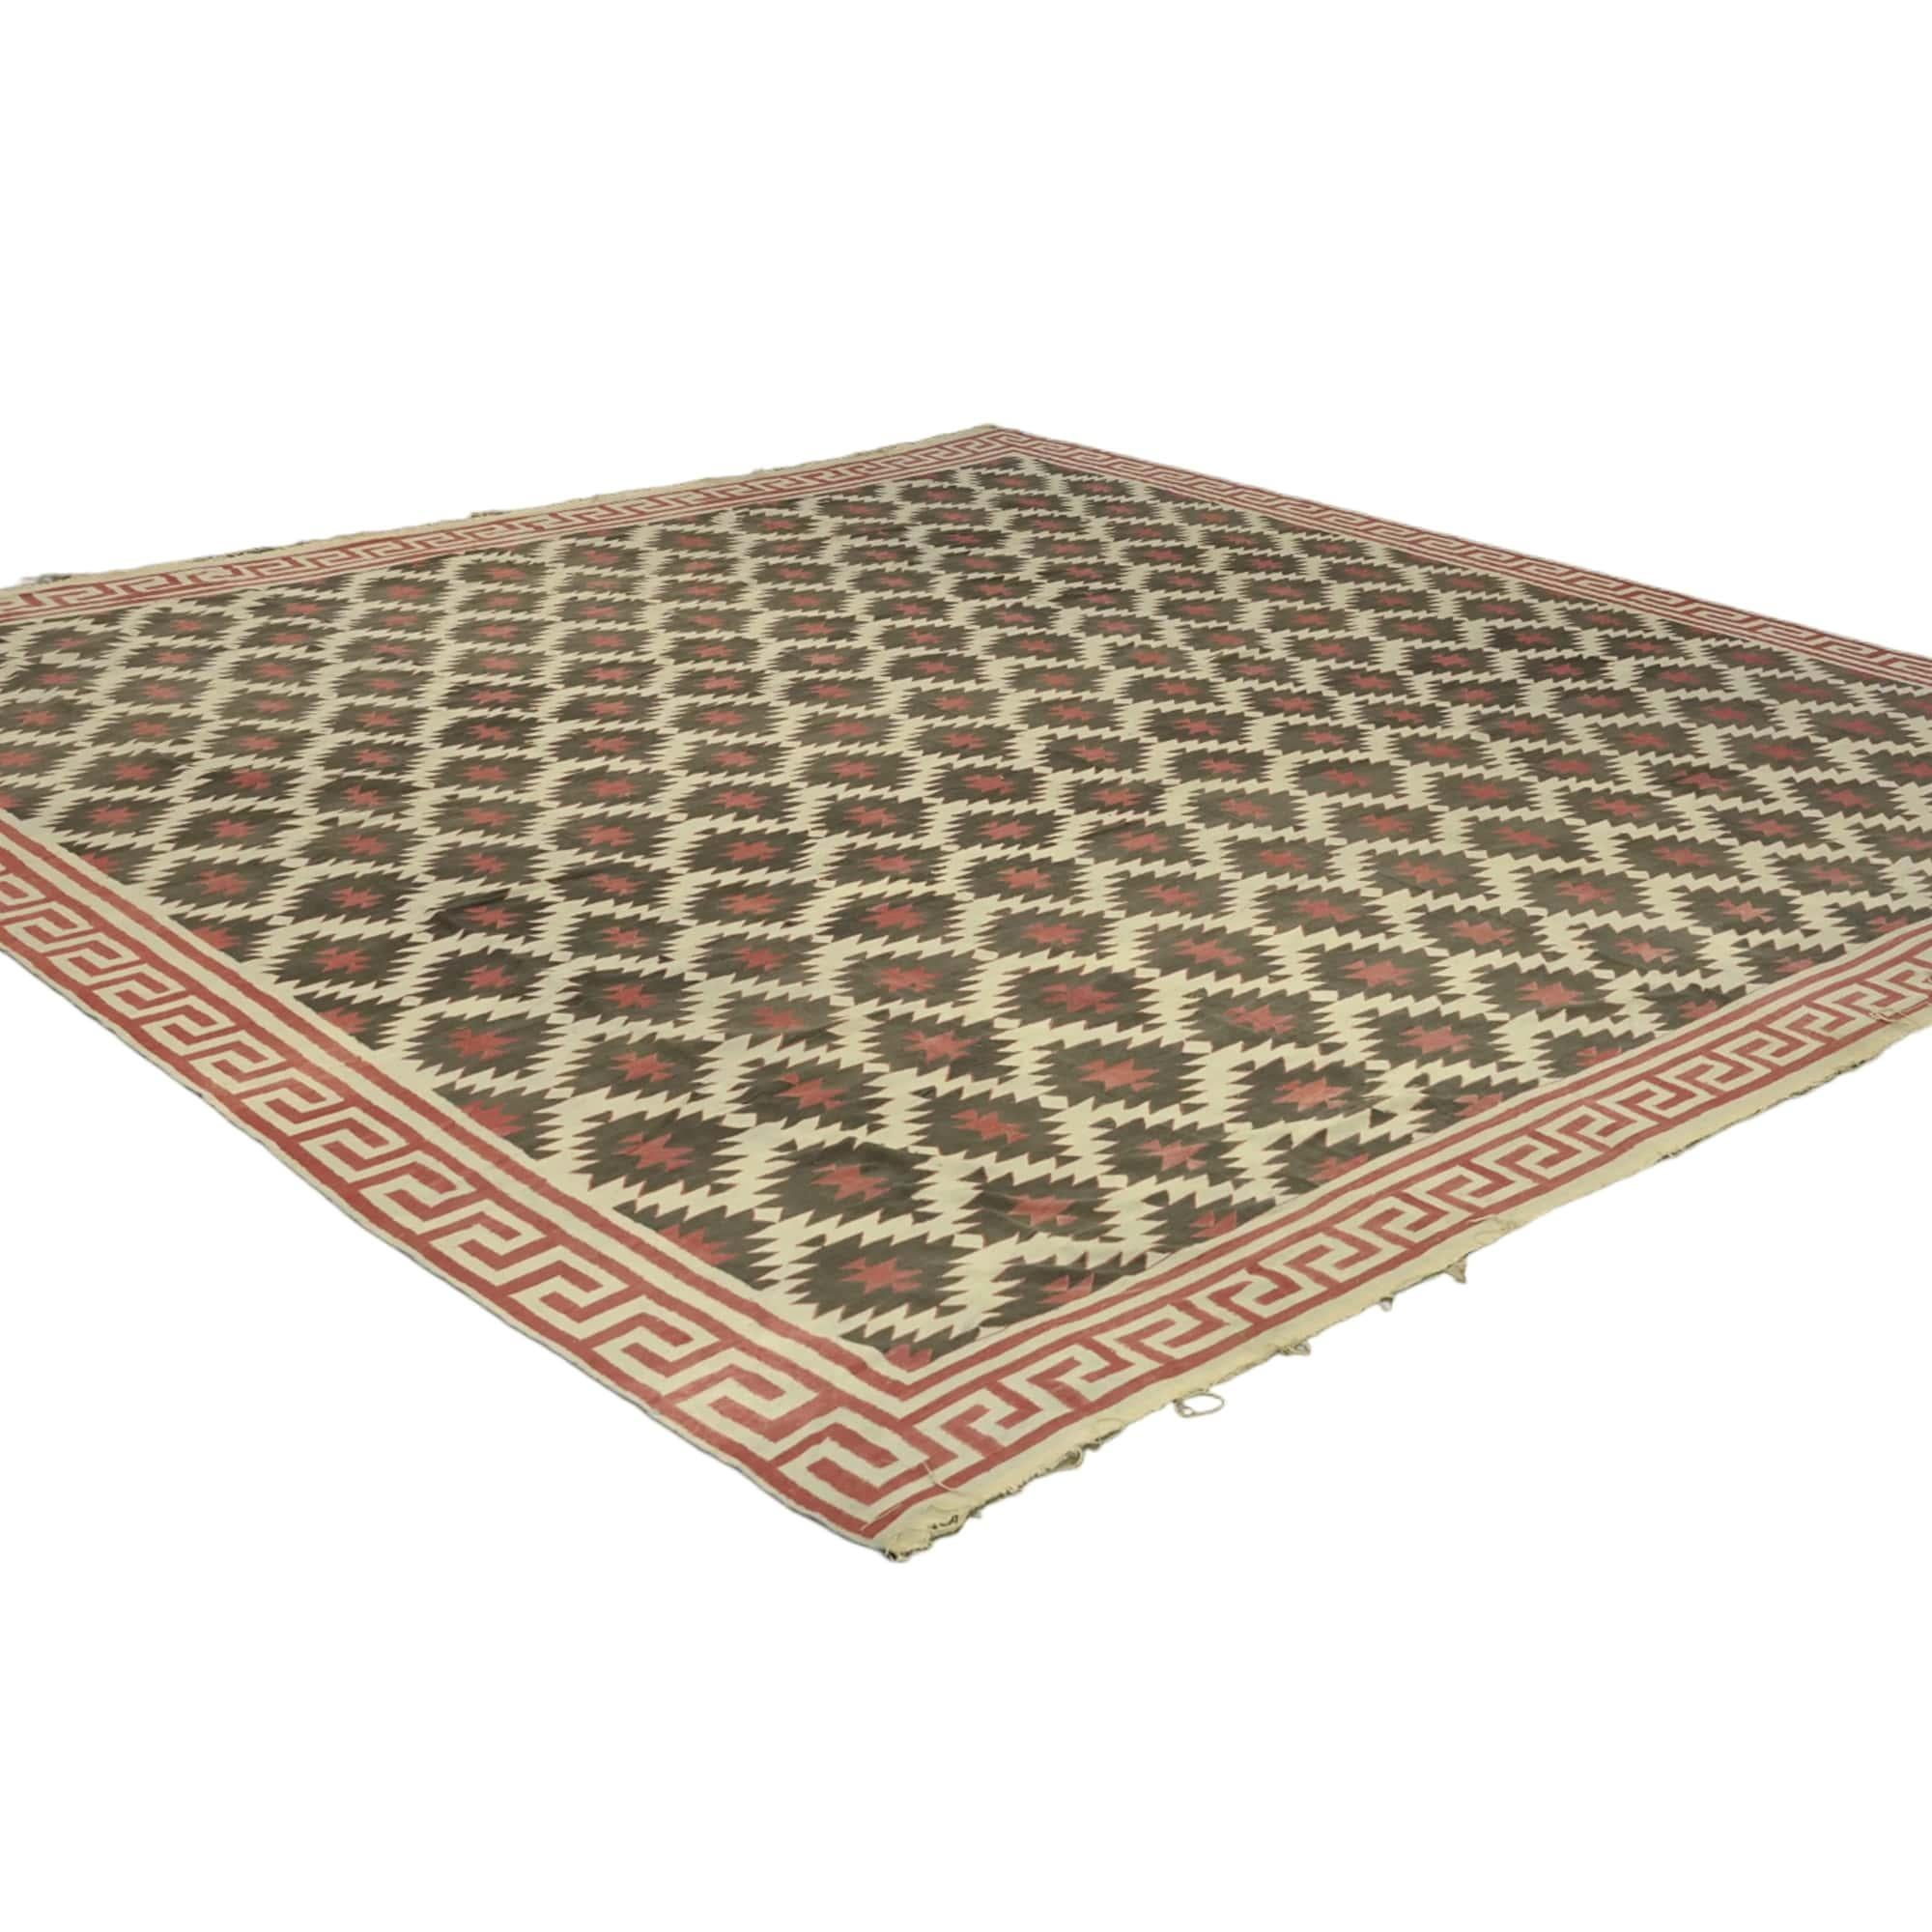 This vintage 16x16 Dhurrie flat weave runner is an exciting new entry in our esteemed collection. Handwoven in wool, it originates from India circa 1950-1960. 

On the Design: 

From our exclusive collection of vintage flatweaves, a masterpiece